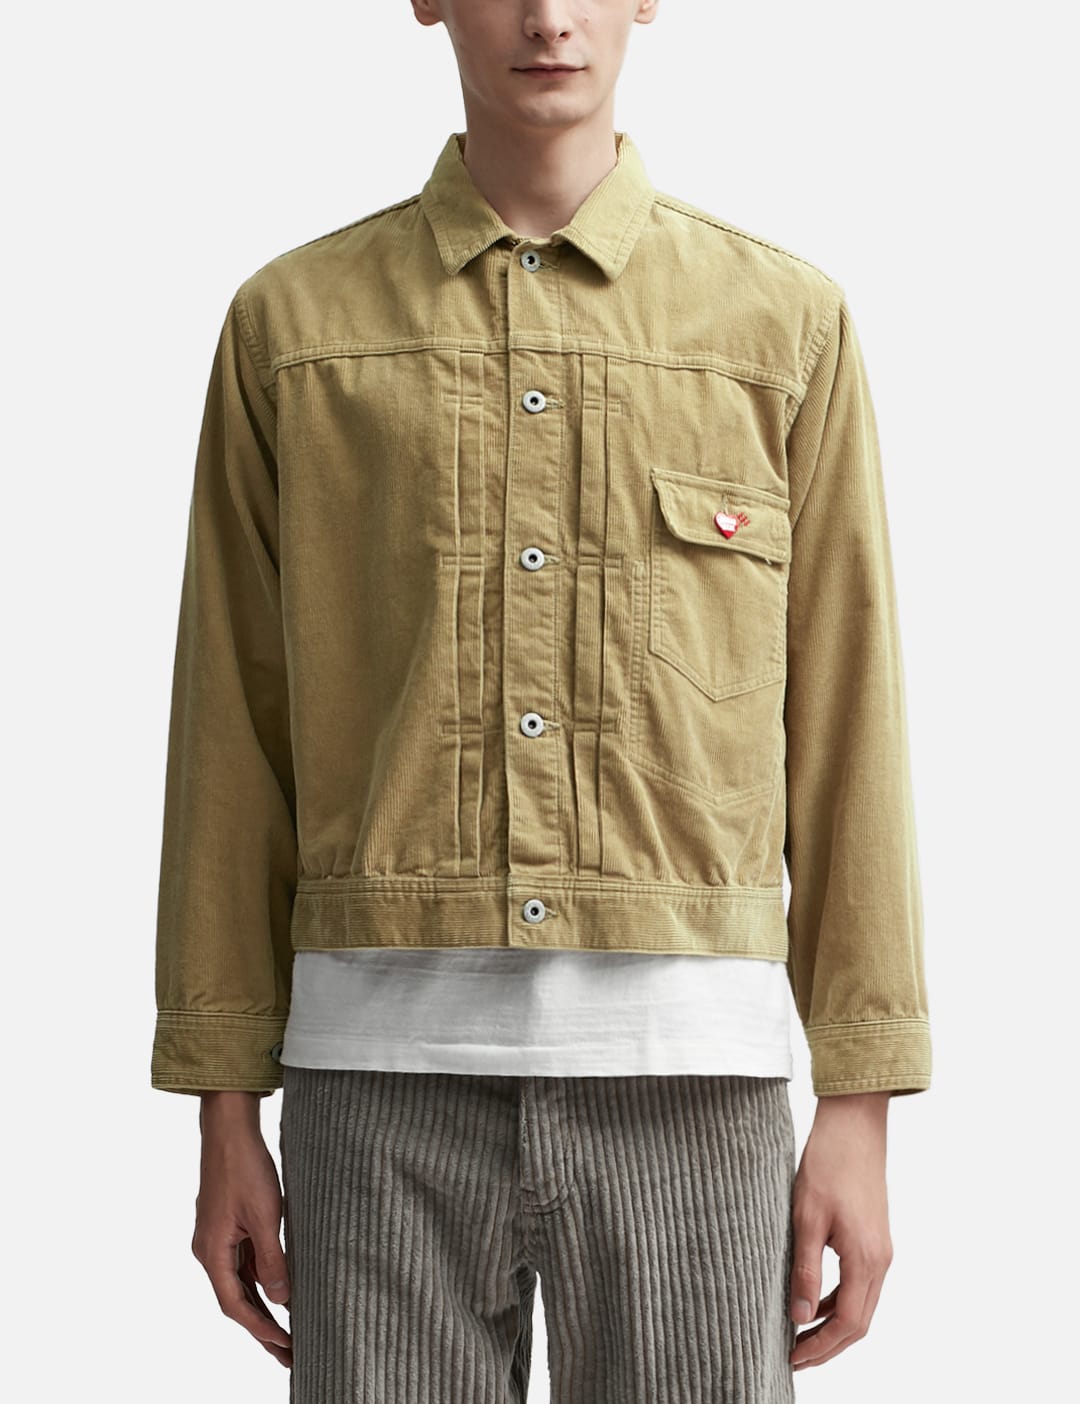 Human Made - Dachs Corduroy Work Jacket | HBX - Globally Curated